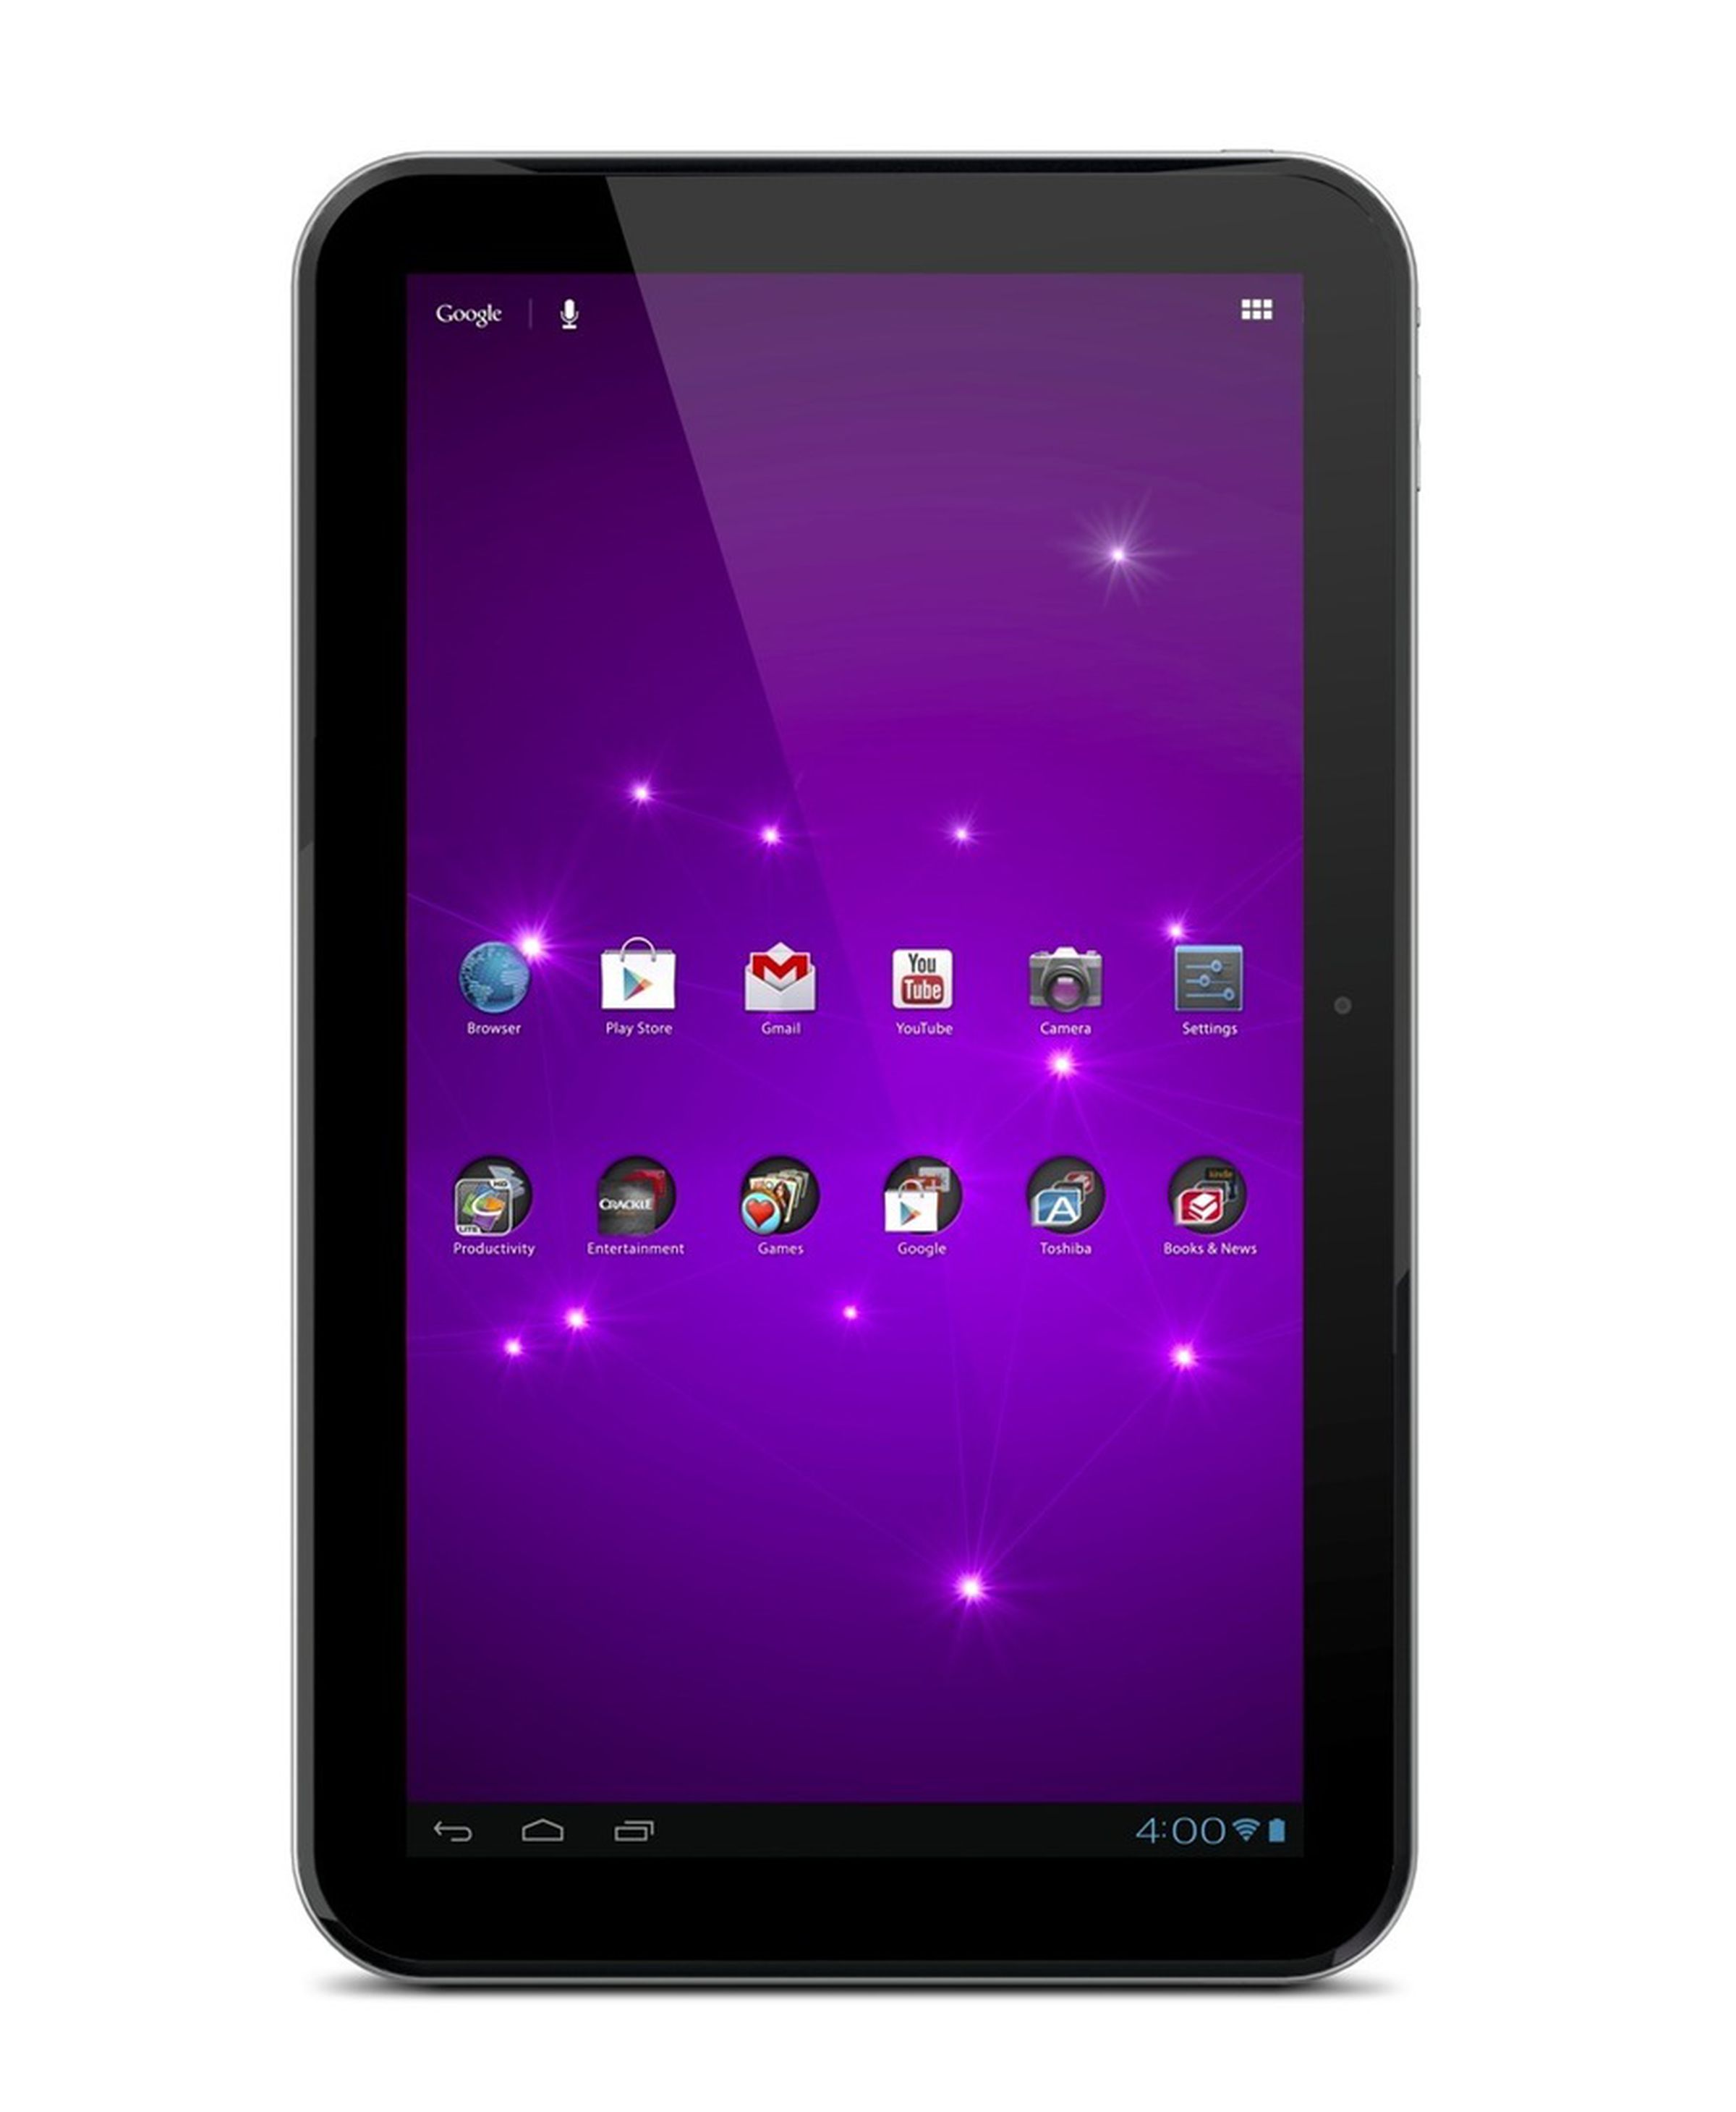 Toshiba Excite 7.7, Excite 10, and Excite 13 pictures